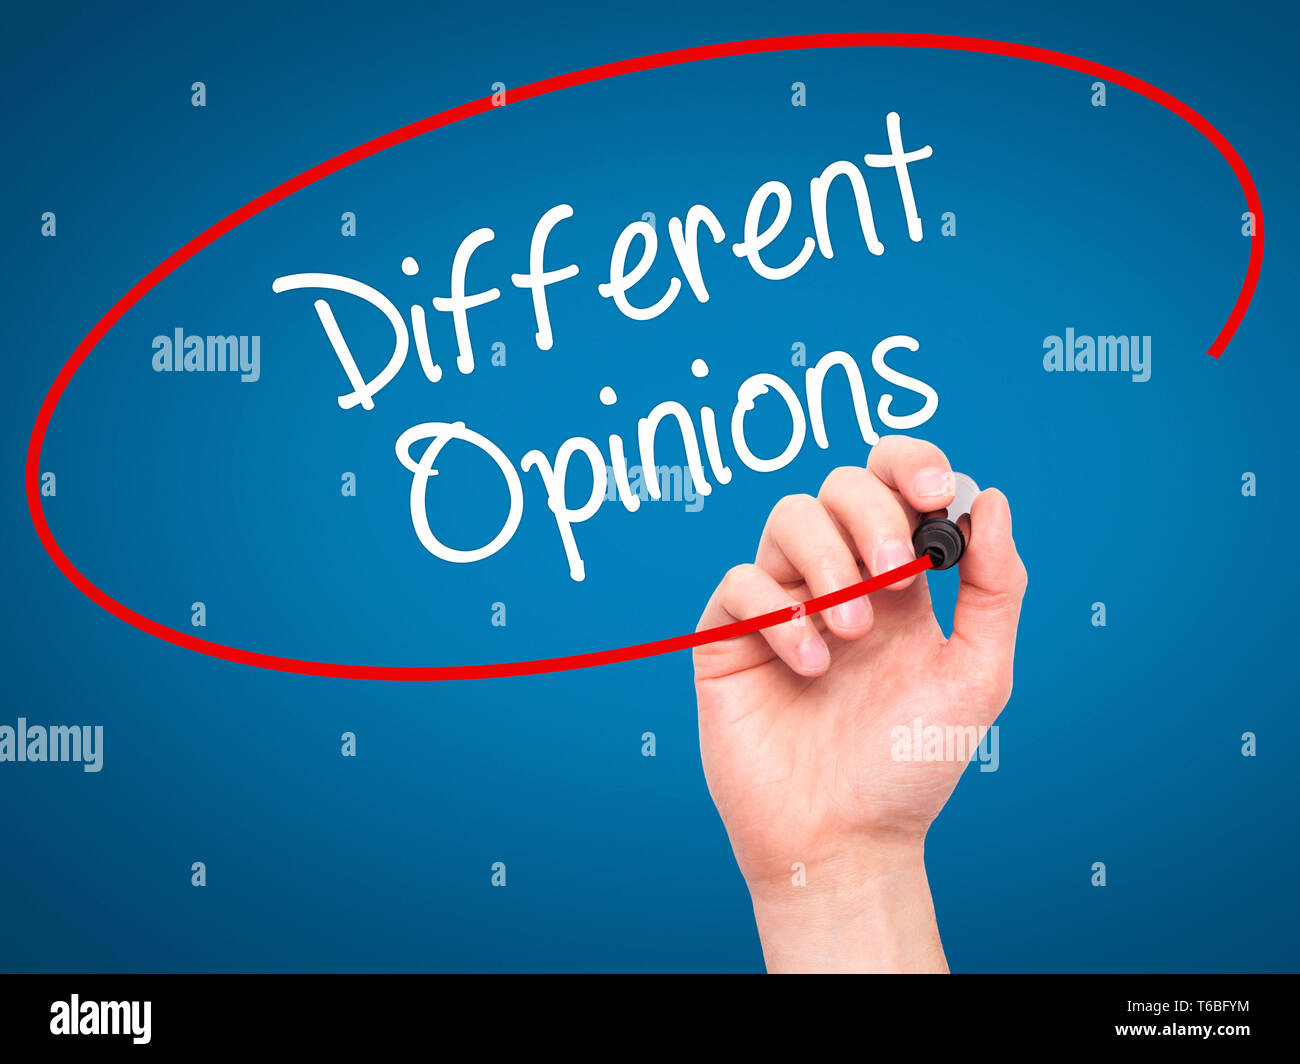 Man Hand writing Different Opinions with black marker on visual screen. Stock Photo